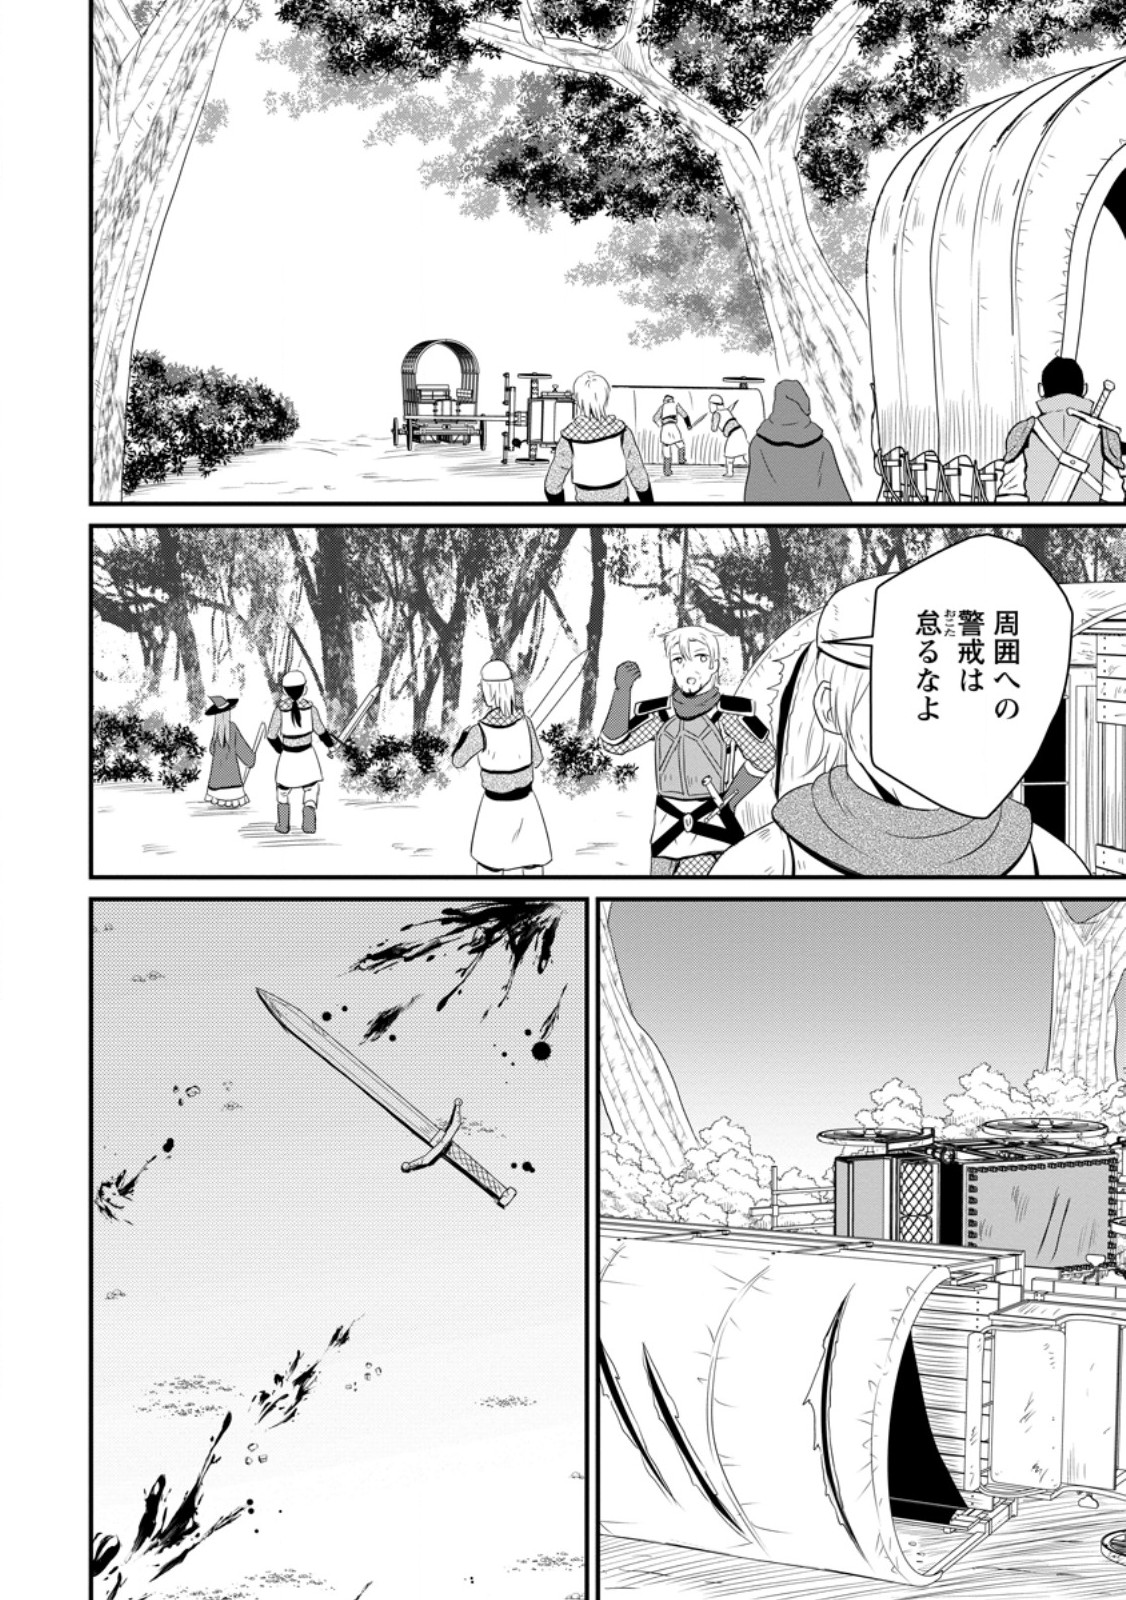 The Frontier Life of The Low-Class Ossan Healer And The Lovery Girl - Chapter 48.2 - Page 2